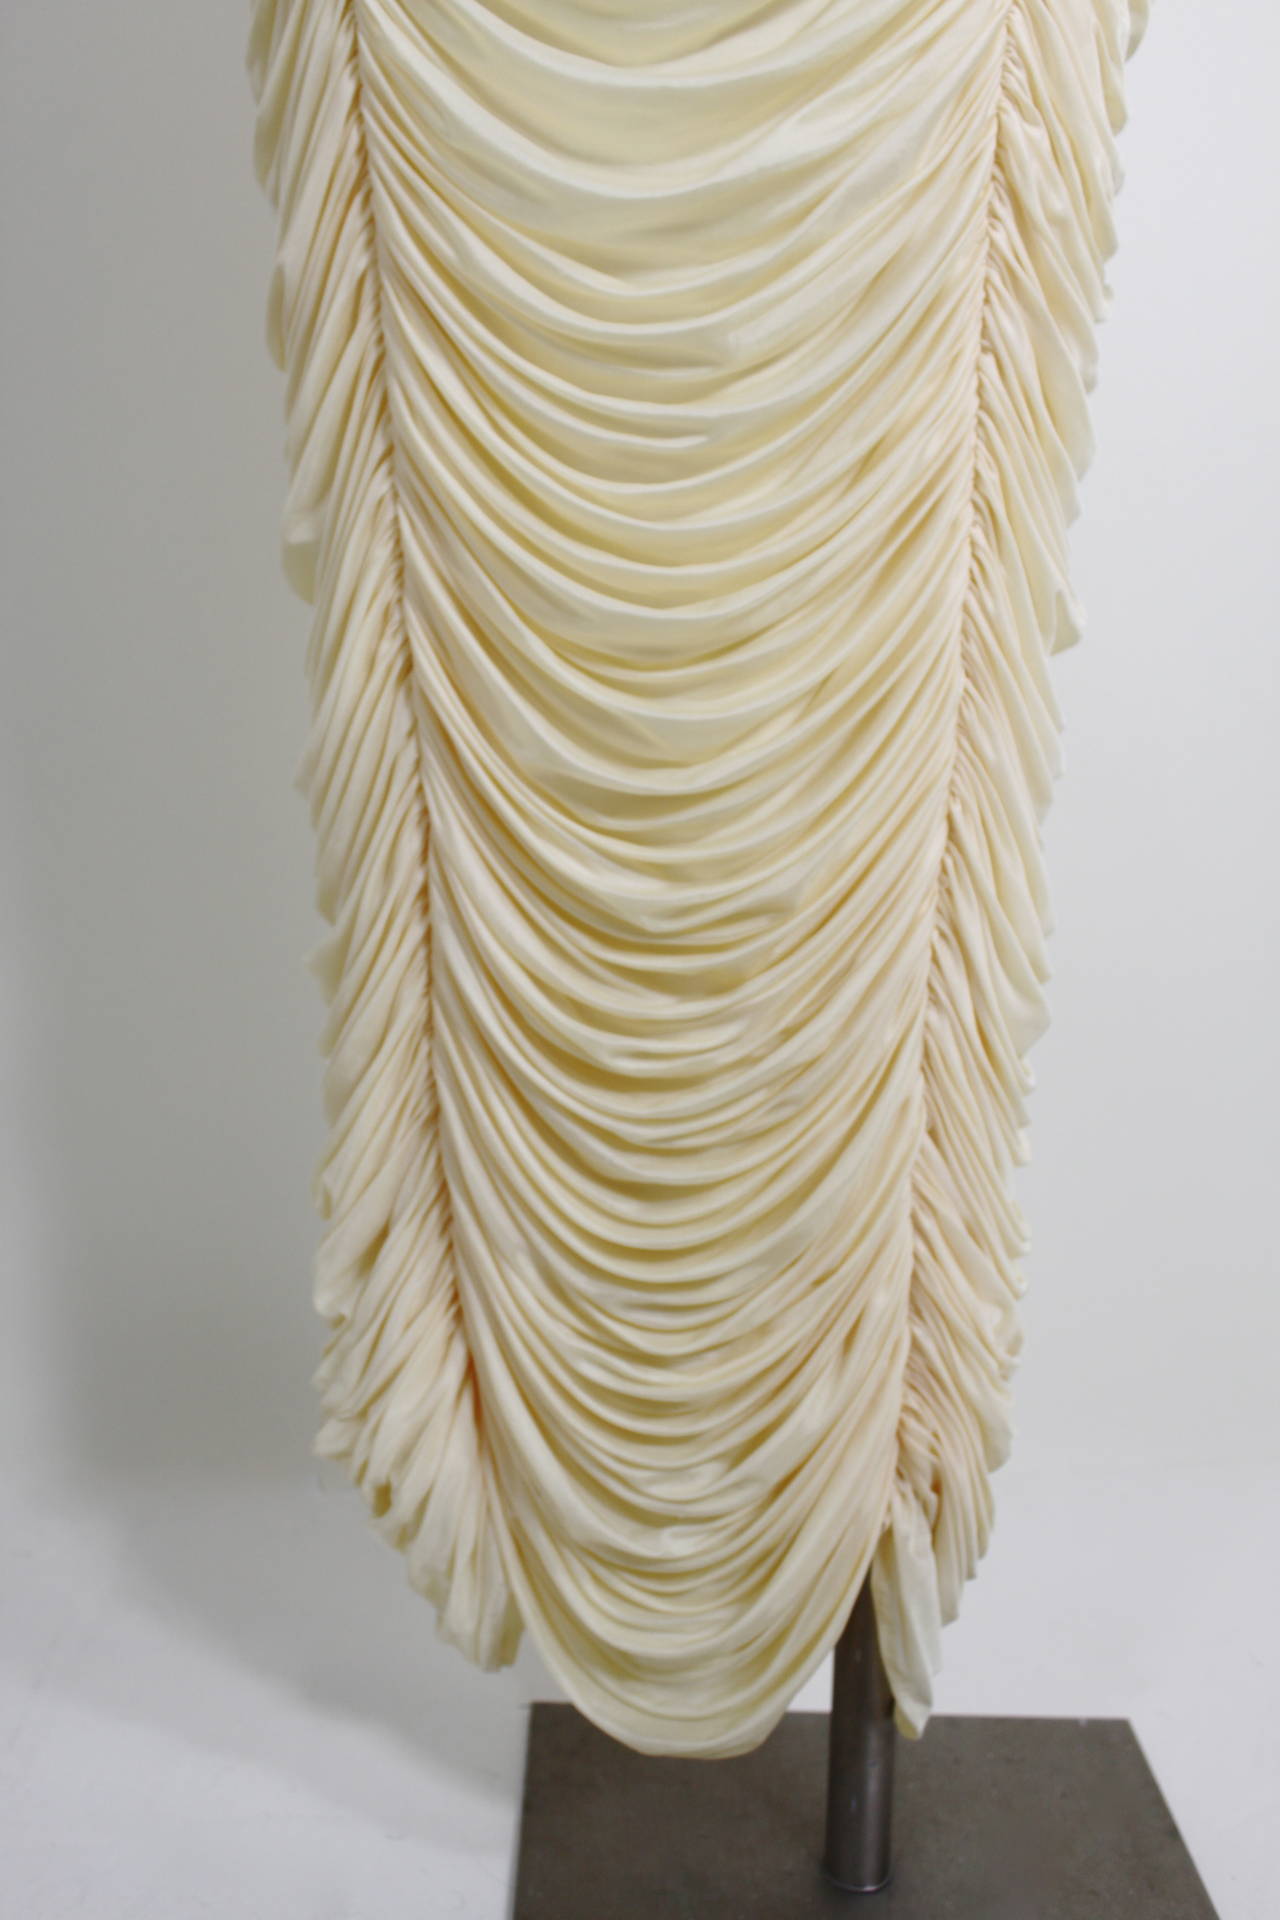 Women's 1980s Cream Tiered Confection Goddess Gown